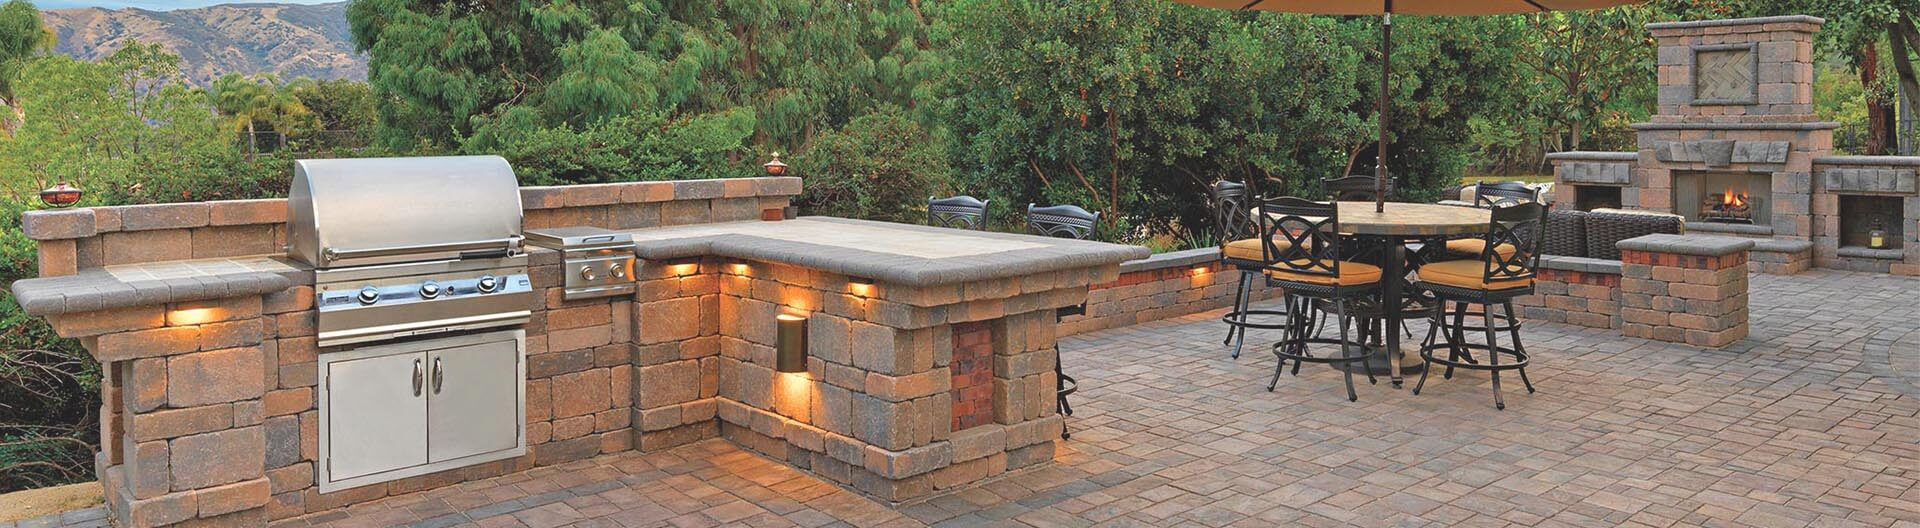 outdoor kitchen on paver patio with furniture